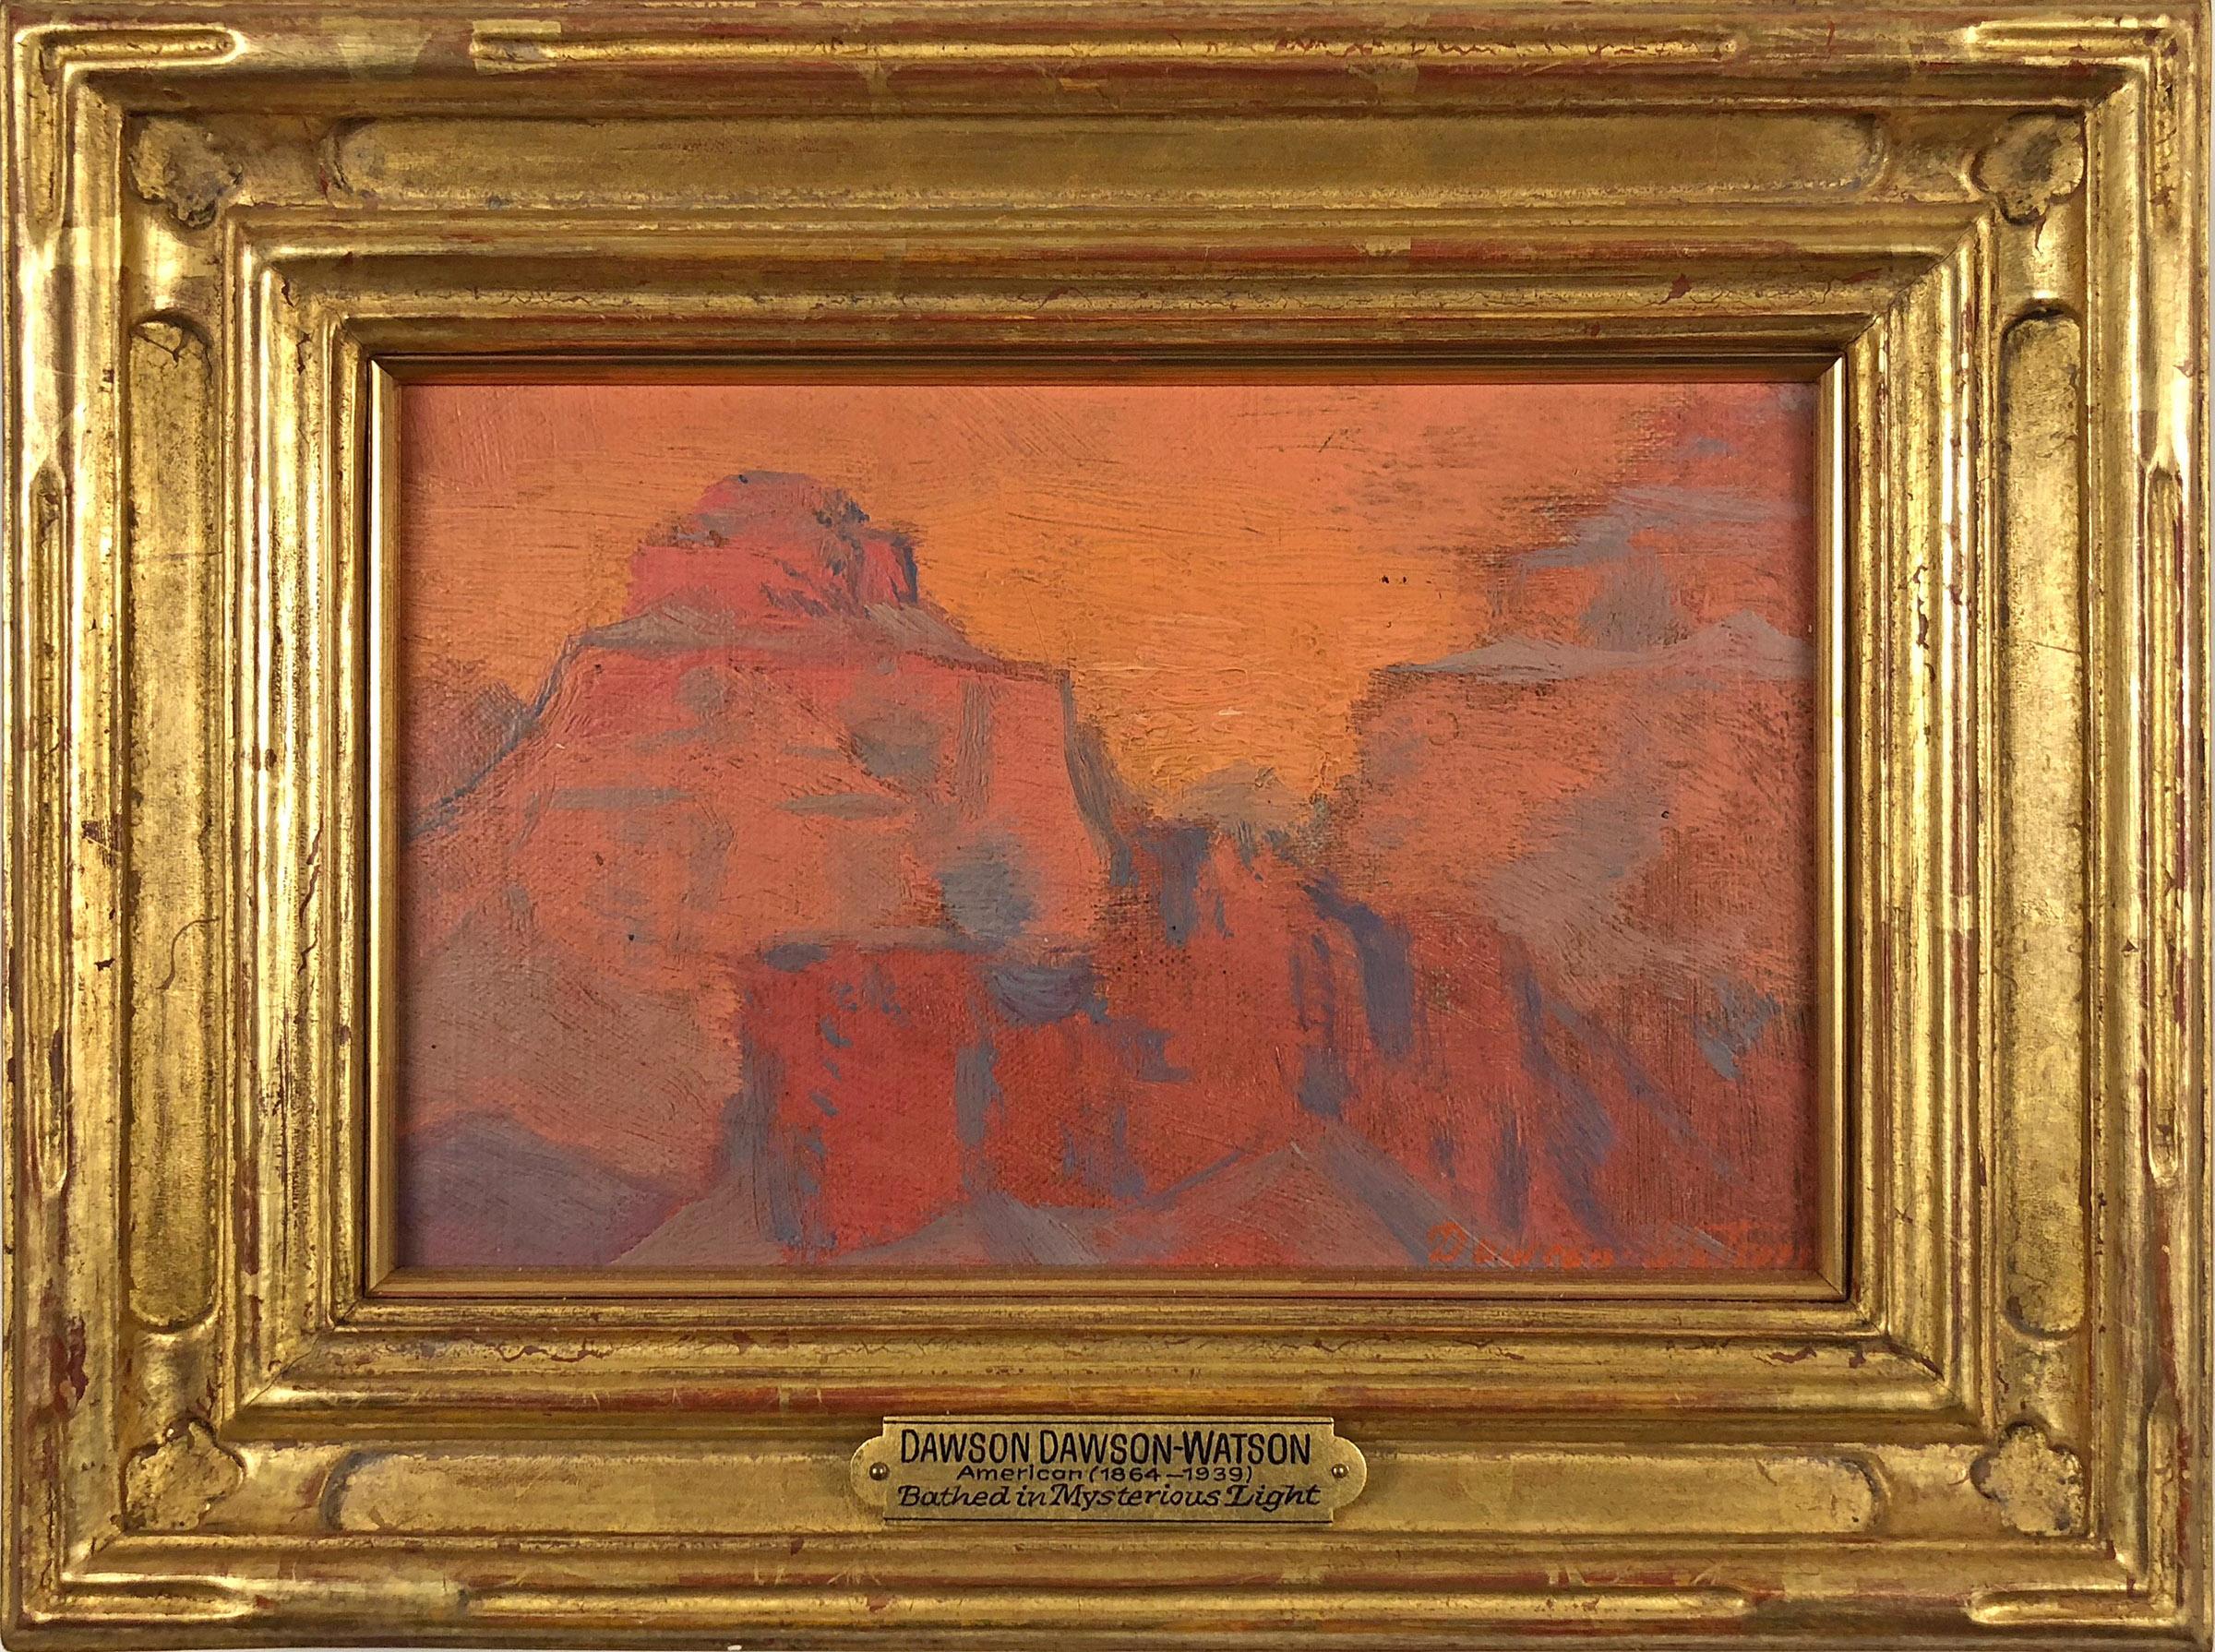 Dawson Dawson-Watson Landscape Painting - Bathed in Mysterious Light (Grand Canyon)